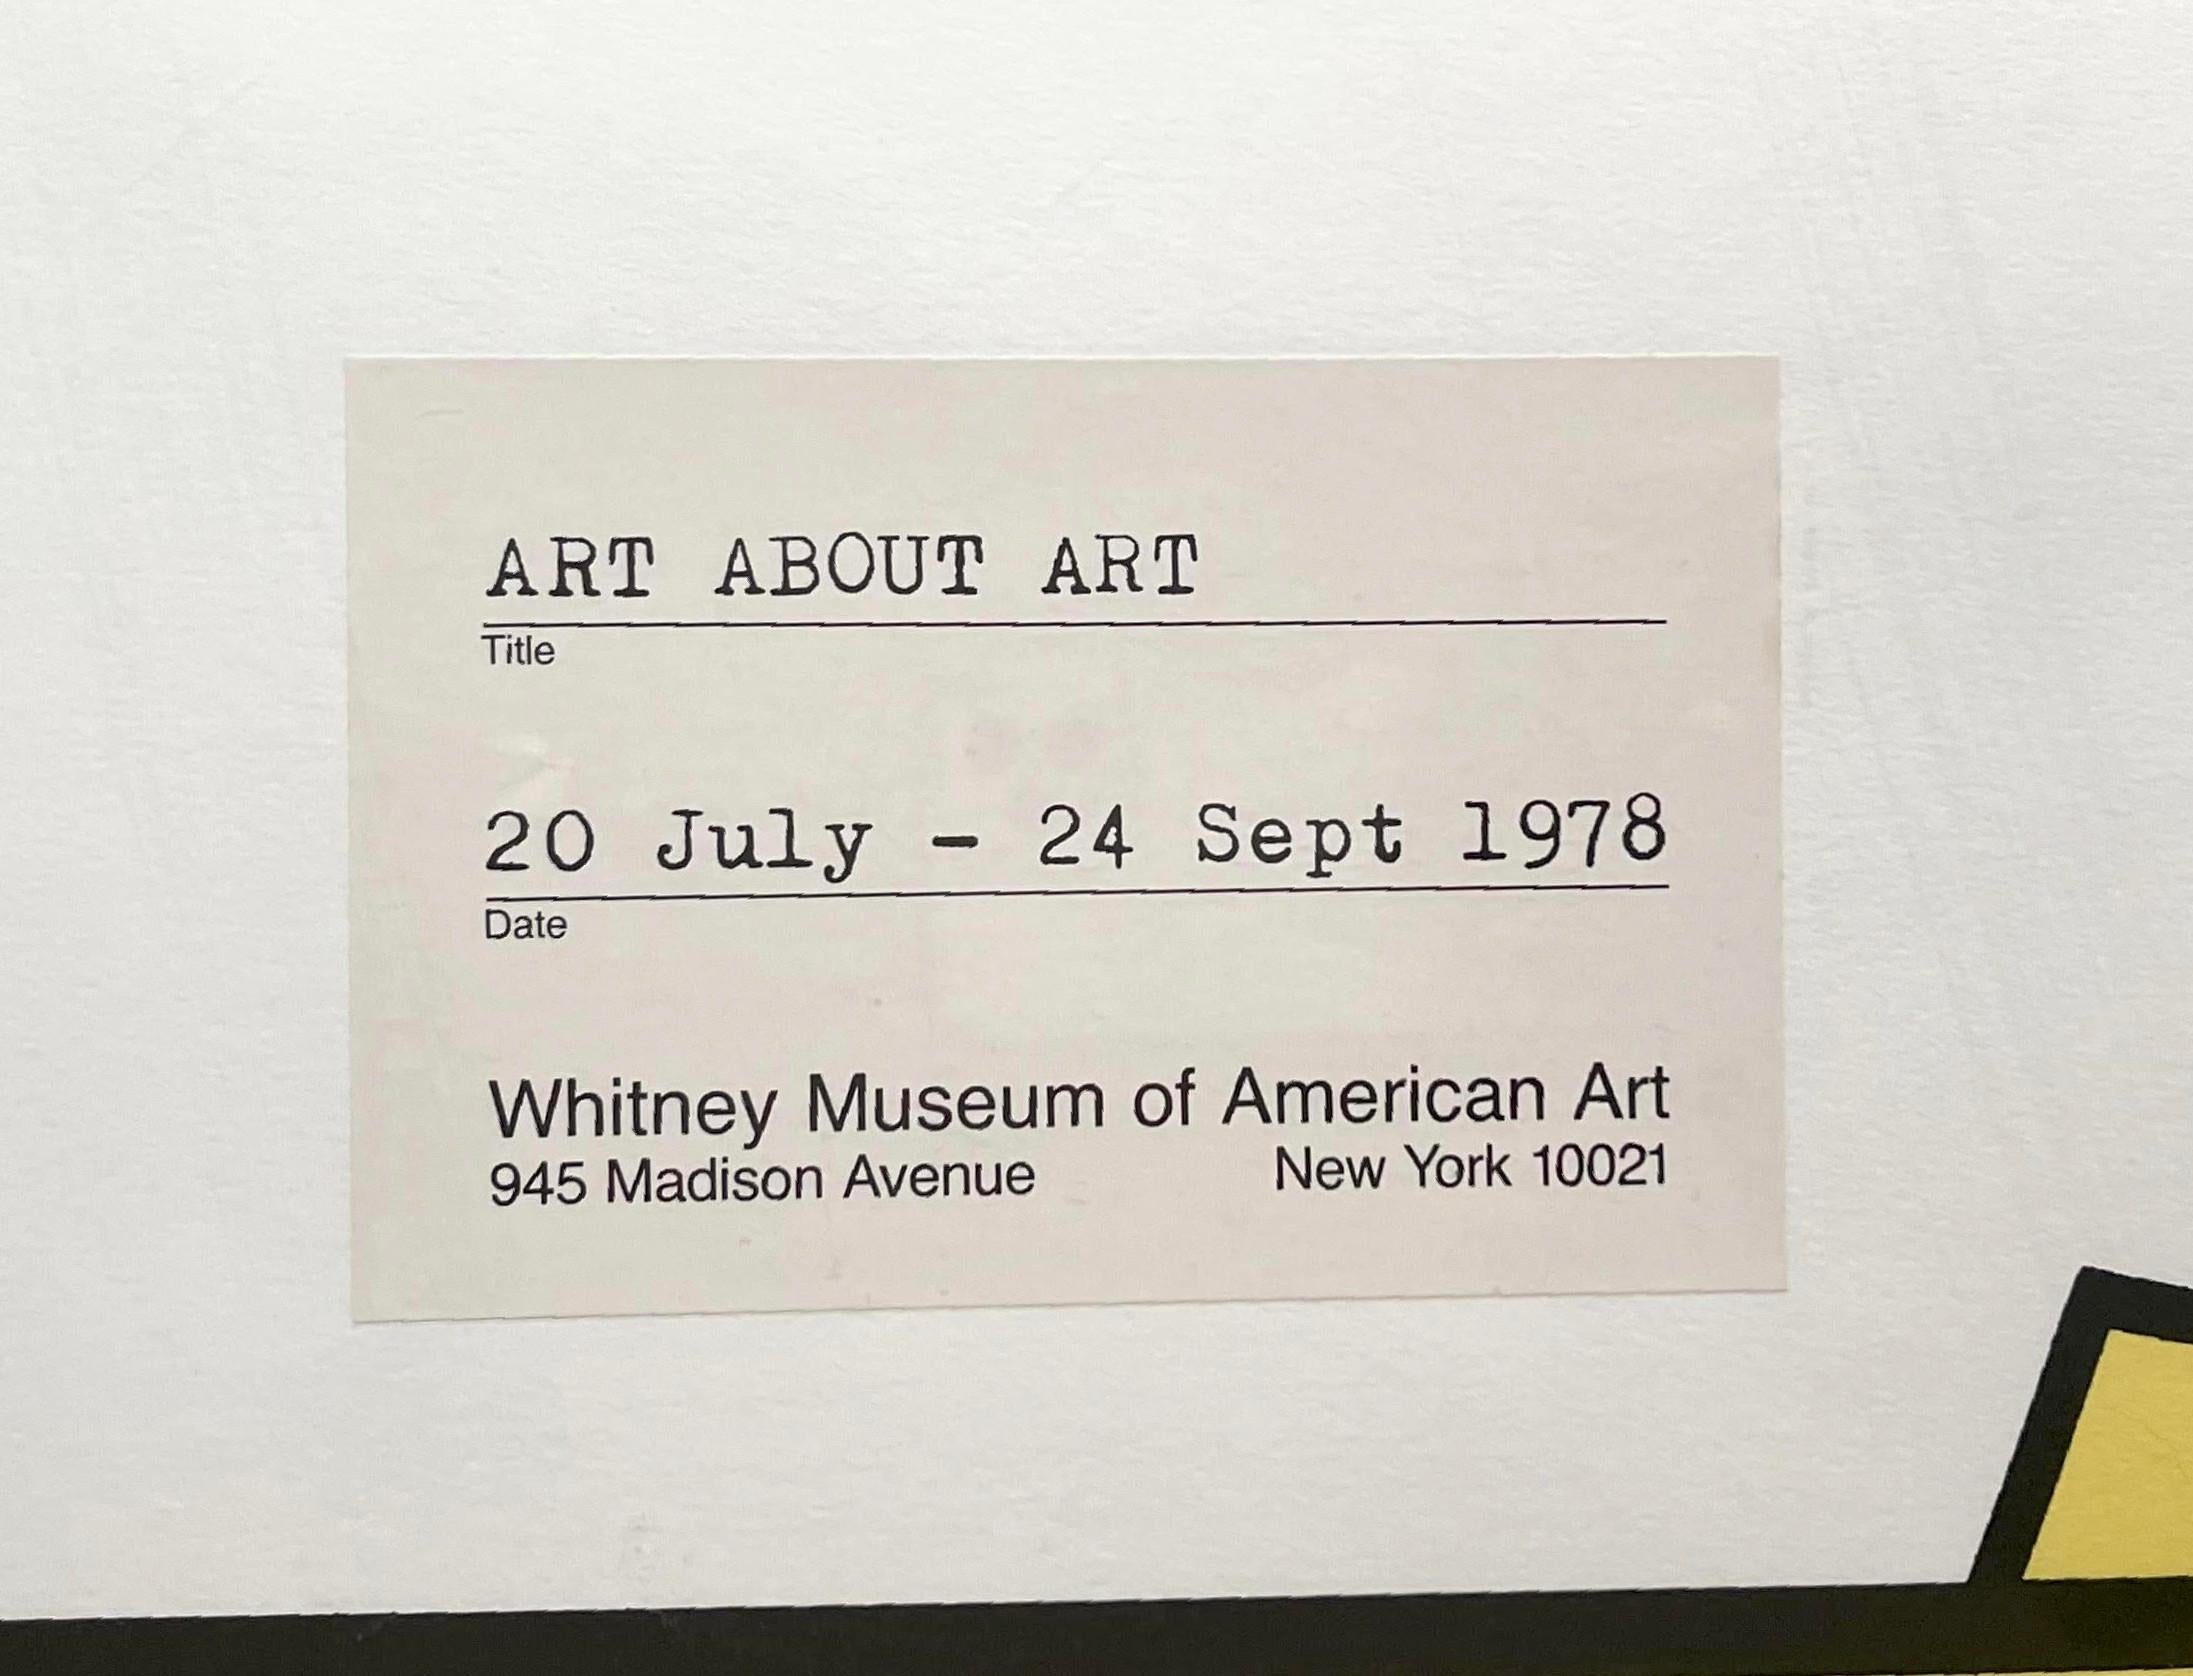 Art About Art, iconic Whitney Museum of American Pop Art lithographic poster - Print by Roy Lichtenstein